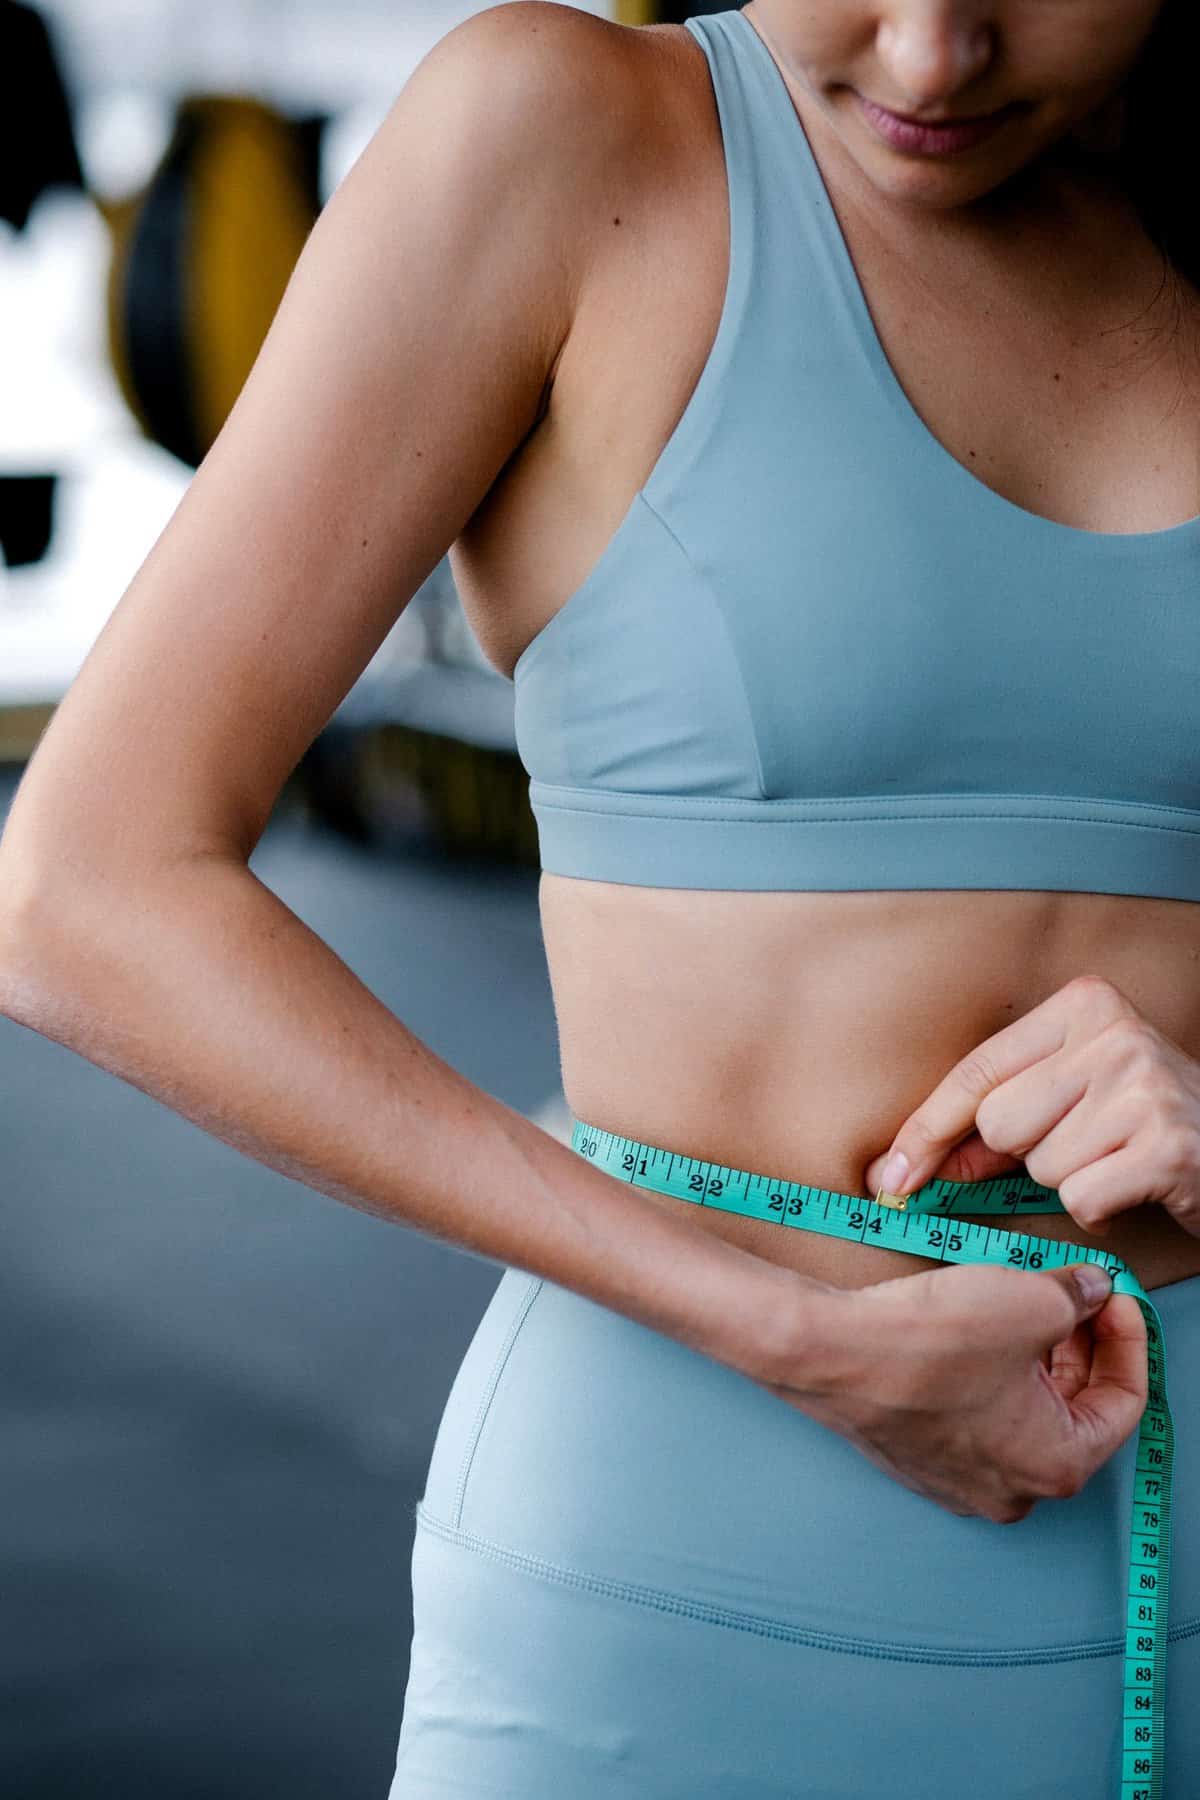 Woman in workout set measuring waist with a measuring tape.